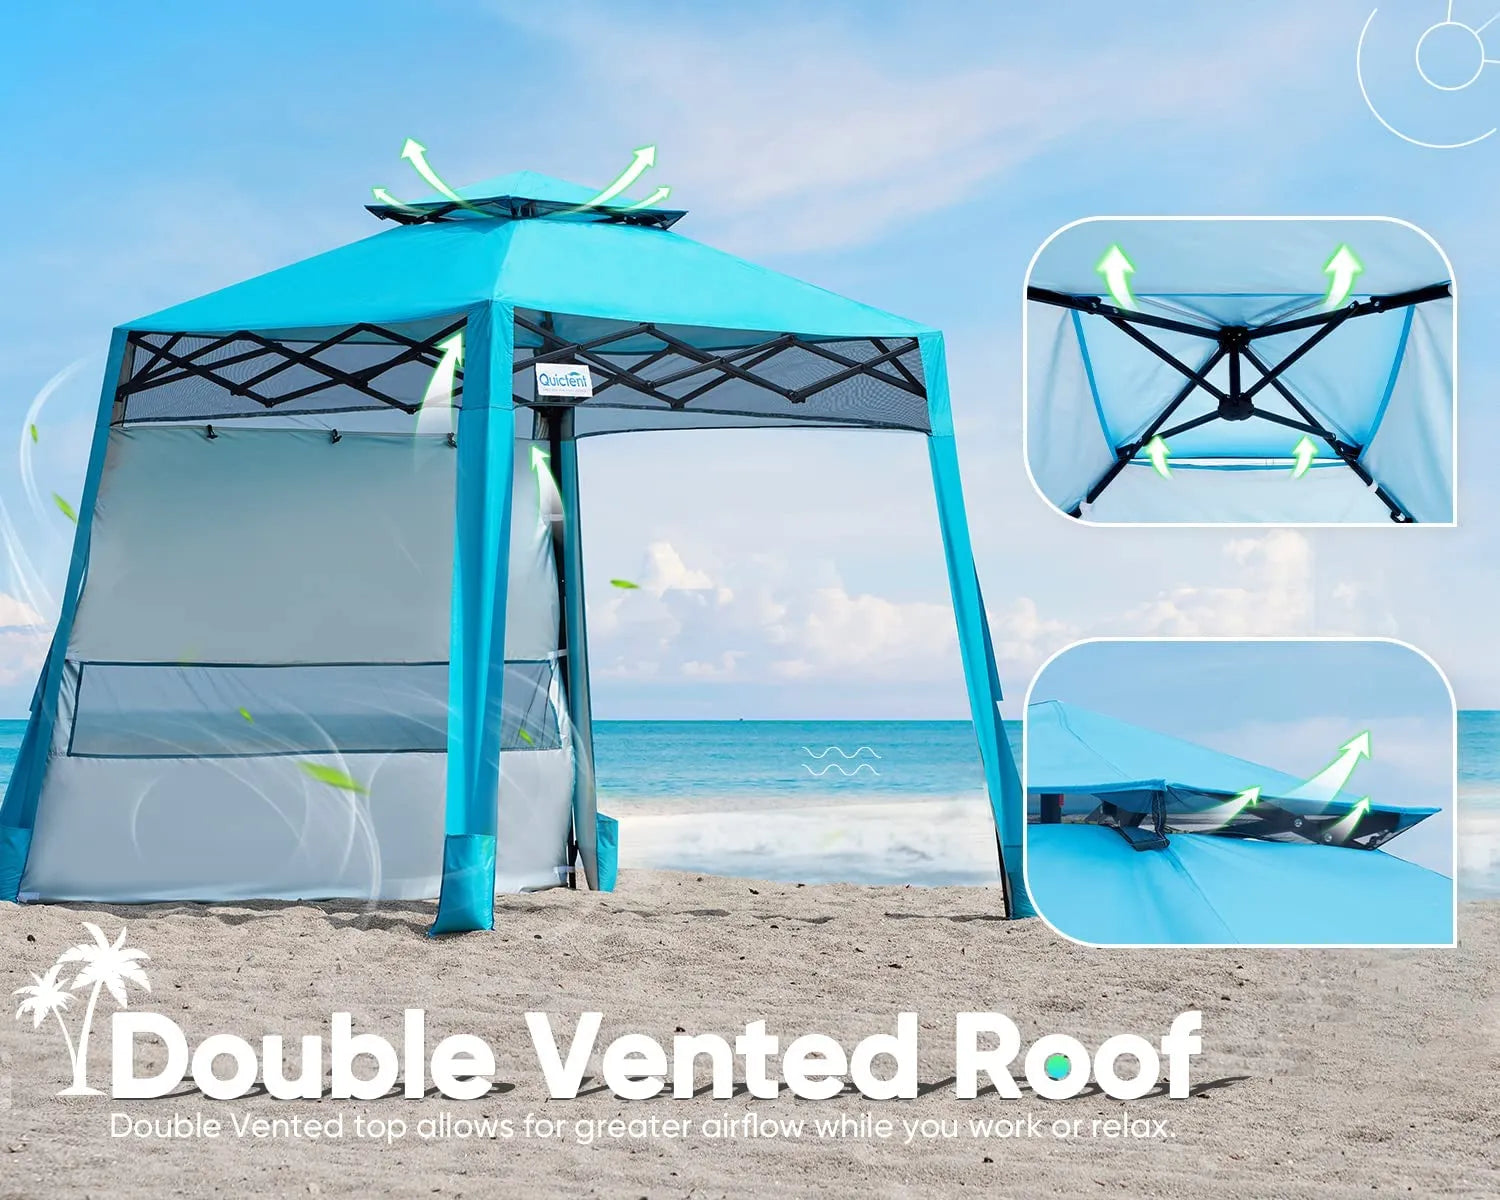 Blue Compact Portable Canopy Vent Roof